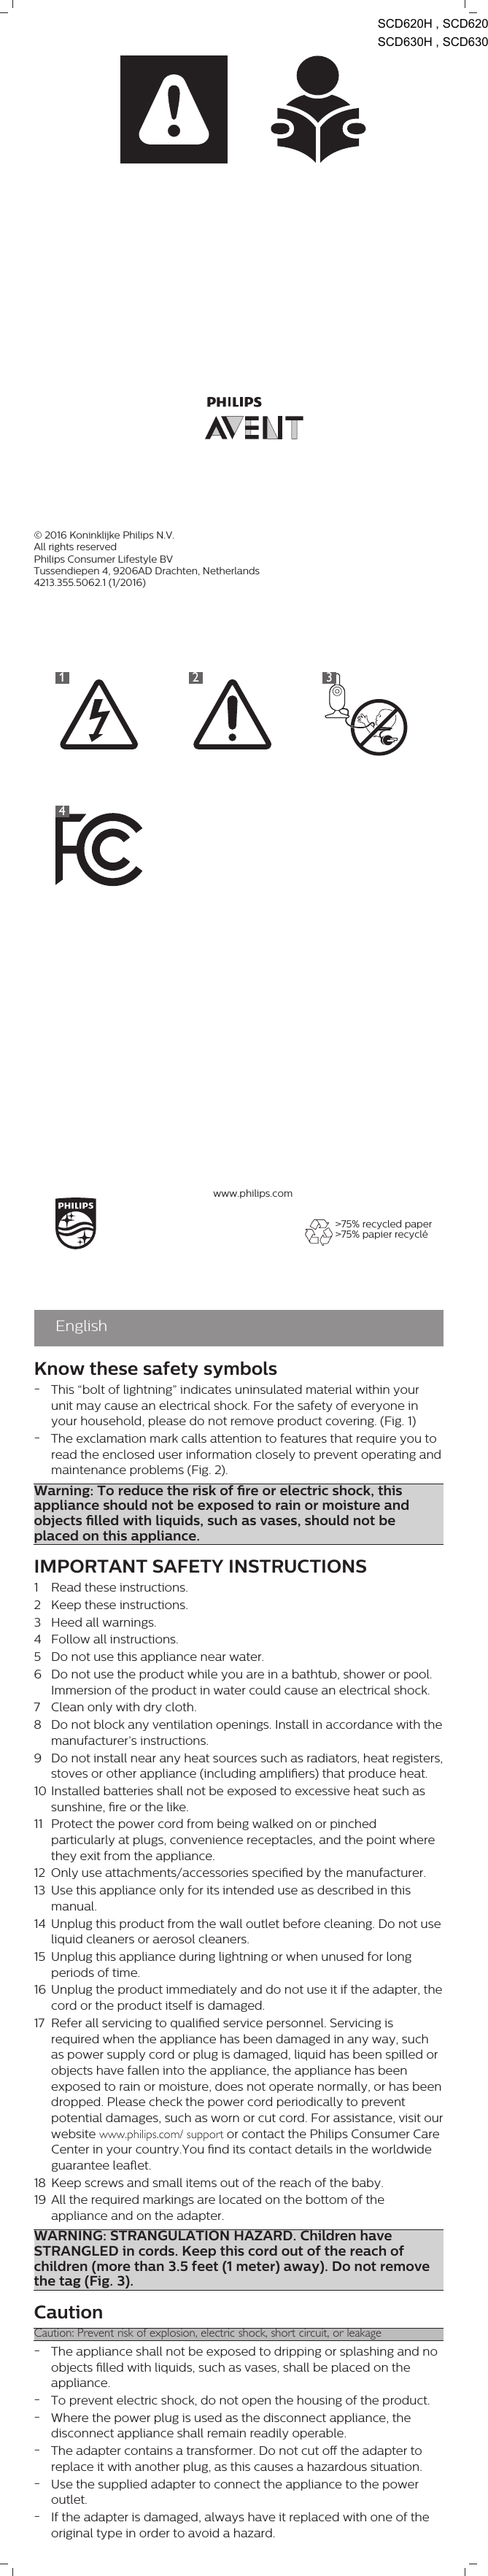 1234&gt;75% recycled paper&gt;75% papier recycléwww.philips.comEnglishKnow these safety symbols-This “bolt of lightning” indicates uninsulated material within yourunit may cause an electrical shock. For the safety of everyone inyour household, please do not remove product covering. (Fig. 1)-The exclamation mark calls attention to features that require you toread the enclosed user information closely to prevent operating andmaintenance problems (Fig. 2).Warning: To reduce the risk of re or electric shock, thisappliance should not be exposed to rain or moisture andobjects lled with liquids, such as vases, should not beplaced on this appliance.IMPORTANT SAFETY INSTRUCTIONS1 Read these instructions.2 Keep these instructions.3 Heed all warnings.4 Follow all instructions.5 Do not use this appliance near water.6 Do not use the product while you are in a bathtub, shower or pool.Immersion of the product in water could cause an electrical shock.7 Clean only with dry cloth.8 Do not block any ventilation openings. Install in accordance with themanufacturer’s instructions.9 Do not install near any heat sources such as radiators, heat registers,stoves or other appliance (including ampliers) that produce heat.10 Installed batteries shall not be exposed to excessive heat such assunshine, re or the like.11 Protect the power cord from being walked on or pinchedparticularly at plugs, convenience receptacles, and the point wherethey exit from the appliance.12 Only use attachments/accessories specied by the manufacturer.13 Use this appliance only for its intended use as described in thismanual.14 Unplug this product from the wall outlet before cleaning. Do not useliquid cleaners or aerosol cleaners.15 Unplug this appliance during lightning or when unused for longperiods of time.16 Unplug the product immediately and do not use it if the adapter, thecord or the product itself is damaged.17 Refer all servicing to qualied service personnel. Servicing isrequired when the appliance has been damaged in any way, suchas power supply cord or plug is damaged, liquid has been spilled orobjects have fallen into the appliance, the appliance has beenexposed to rain or moisture, does not operate normally, or has beendropped. Please check the power cord periodically to preventpotential damages, such as worn or cut cord. For assistance, visit ourwebsite www.philips.com/ support or contact the Philips Consumer CareCenter in your country.You nd its contact details in the worldwideguarantee leaet.18 Keep screws and small items out of the reach of the baby.19 All the required markings are located on the bottom of theappliance and on the adapter.WARNING: STRANGULATION HAZARD. Children haveSTRANGLED in cords. Keep this cord out of the reach ofchildren (more than 3.5 feet (1 meter) away). Do not removethe tag (Fig. 3).CautionCaution: Prevent risk of explosion, electric shock, short circuit, or leakage-The appliance shall not be exposed to dripping or splashing and noobjects lled with liquids, such as vases, shall be placed on theappliance.-To prevent electric shock, do not open the housing of the product.-Where the power plug is used as the disconnect appliance, thedisconnect appliance shall remain readily operable.-The adapter contains a transformer. Do not cut o the adapter toreplace it with another plug, as this causes a hazardous situation.-Use the supplied adapter to connect the appliance to the poweroutlet.-If the adapter is damaged, always have it replaced with one of theoriginal type in order to avoid a hazard.© 2016 Koninklijke Philips N.V.All rights reservedPhilips Consumer Lifestyle BVTussendiepen 4, 9206AD Drachten, Netherlands4213.355.5062.1 (1/2016)              SCD620H , SCD620               SCD630H , SCD630